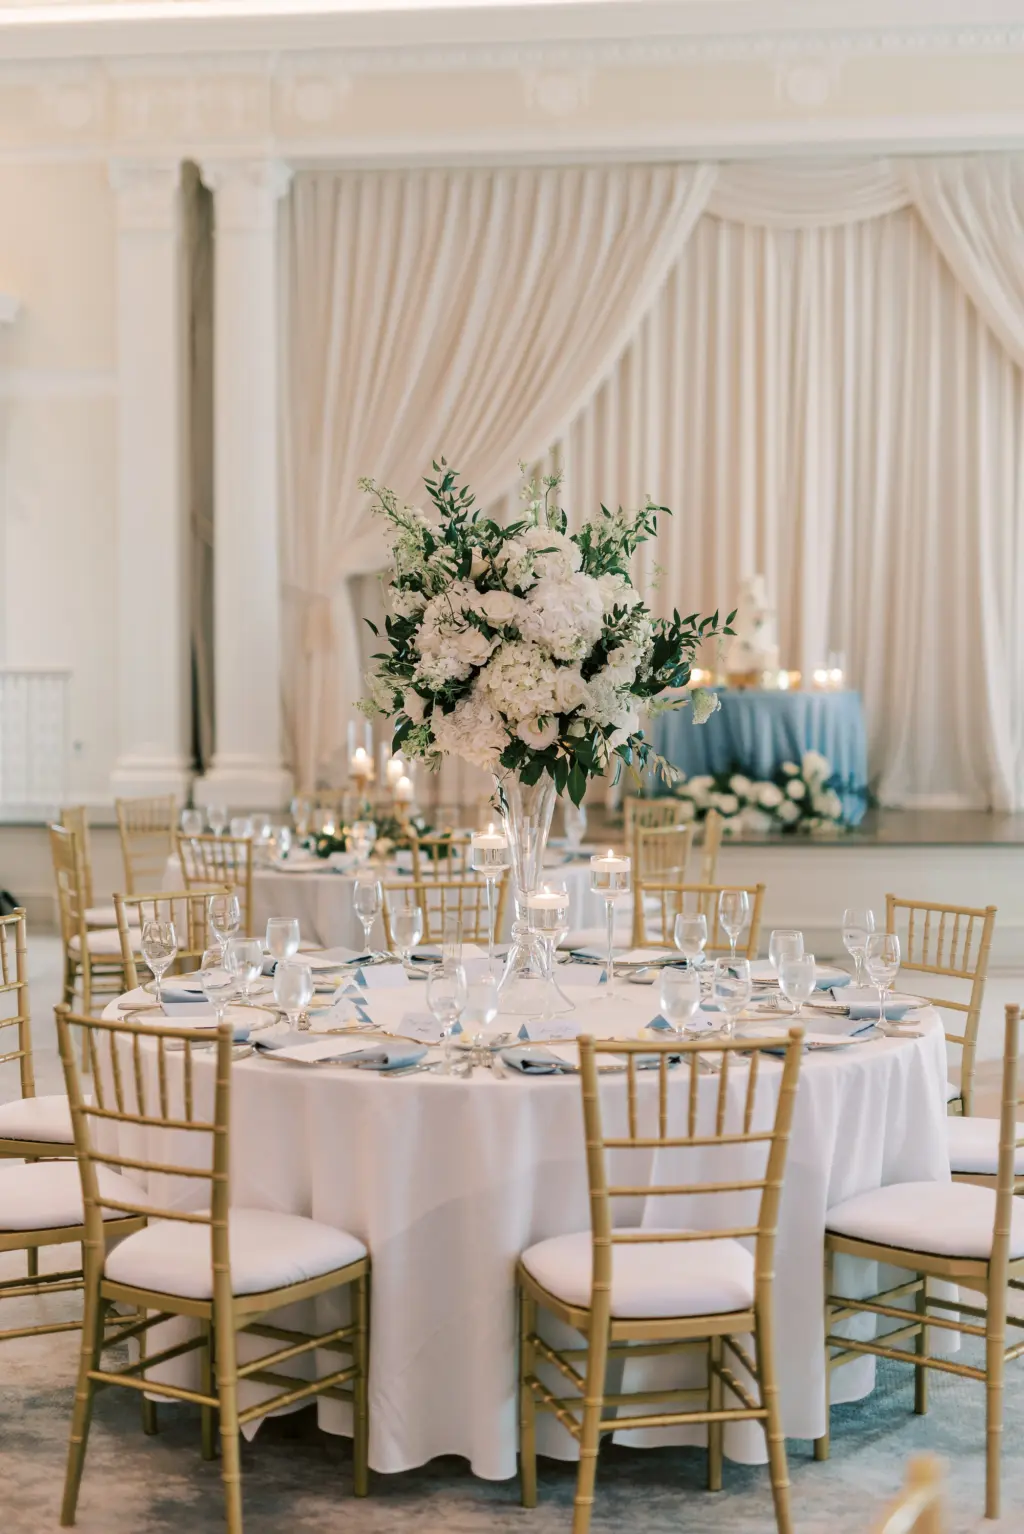 Dusty Blue, White, and Gold Wedding Reception Decor Ideas | Gold Chiavari Chairs | Tampa Bay Rental Company Gabro Event Services